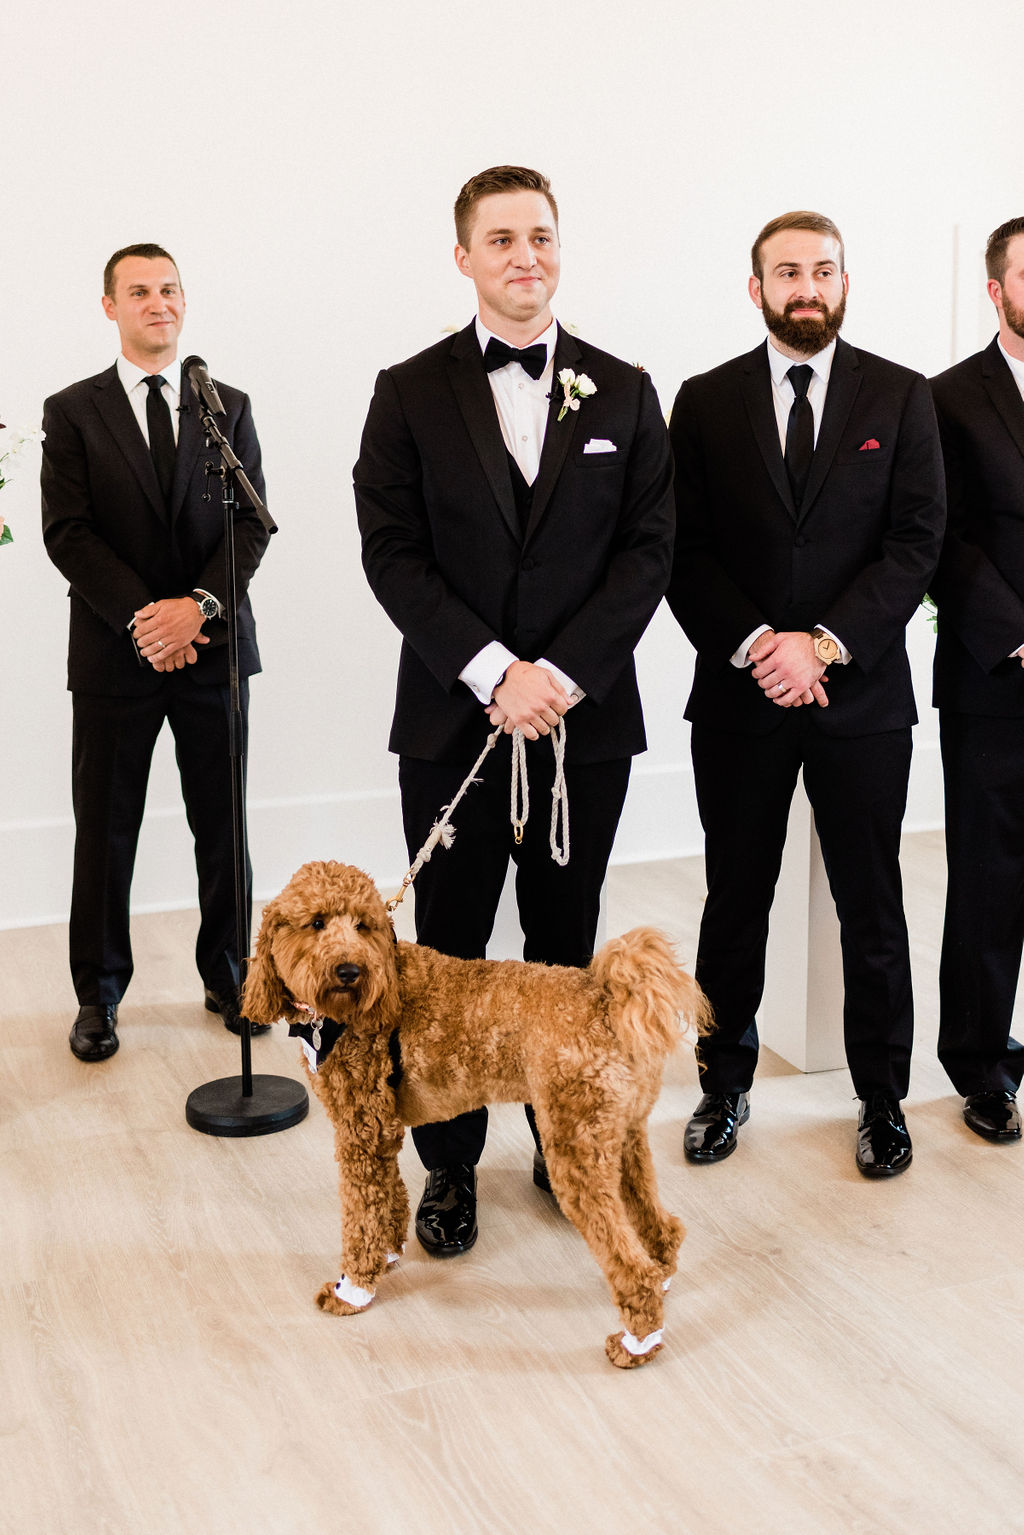 A groom smiling with his dog